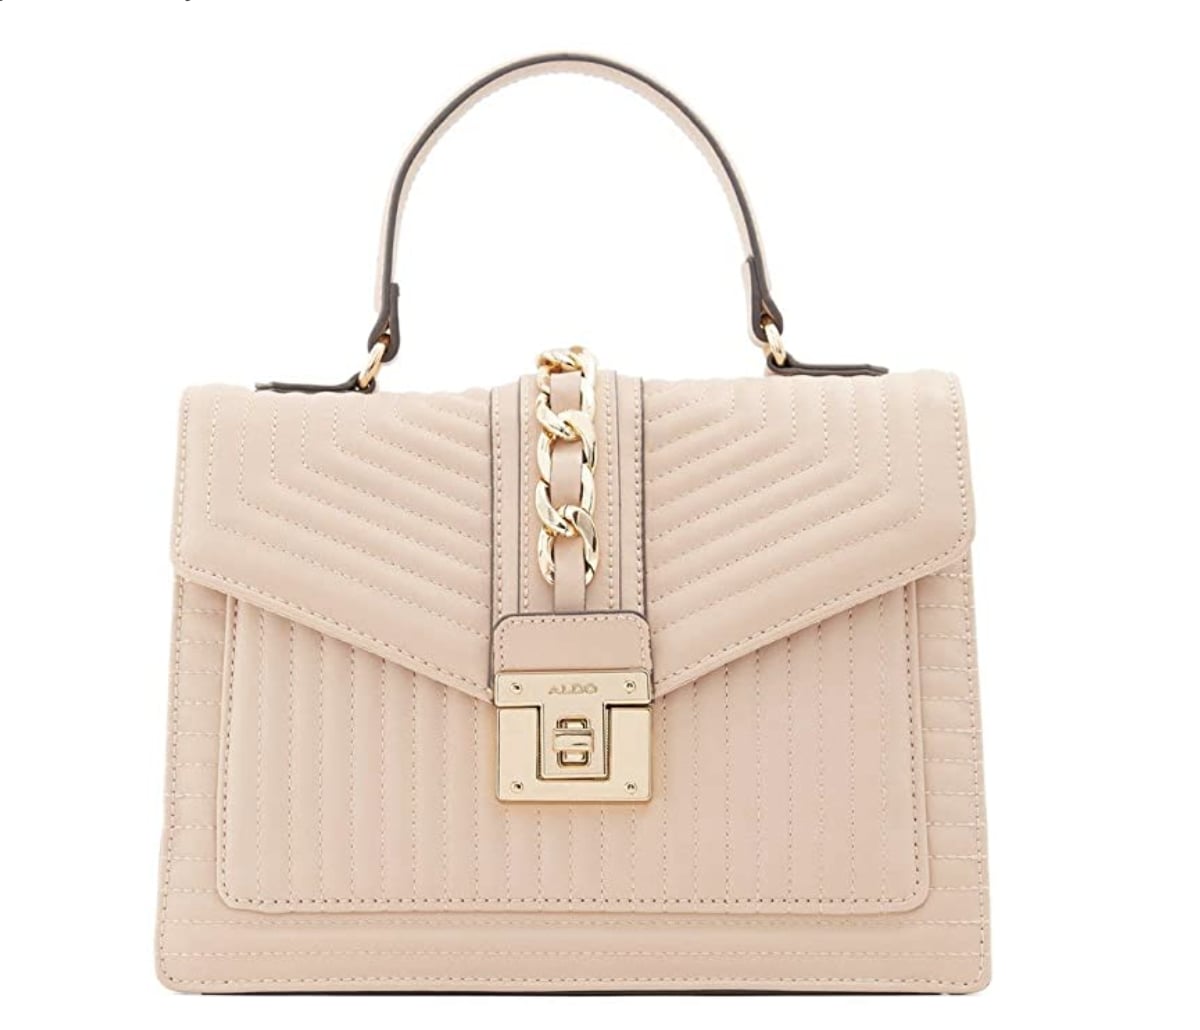 Aldo Jerilini Top Handle Bag, Hold My Wallet, Because These  Prime  Day Deals on Shoes and Bags Are Hard to Resist